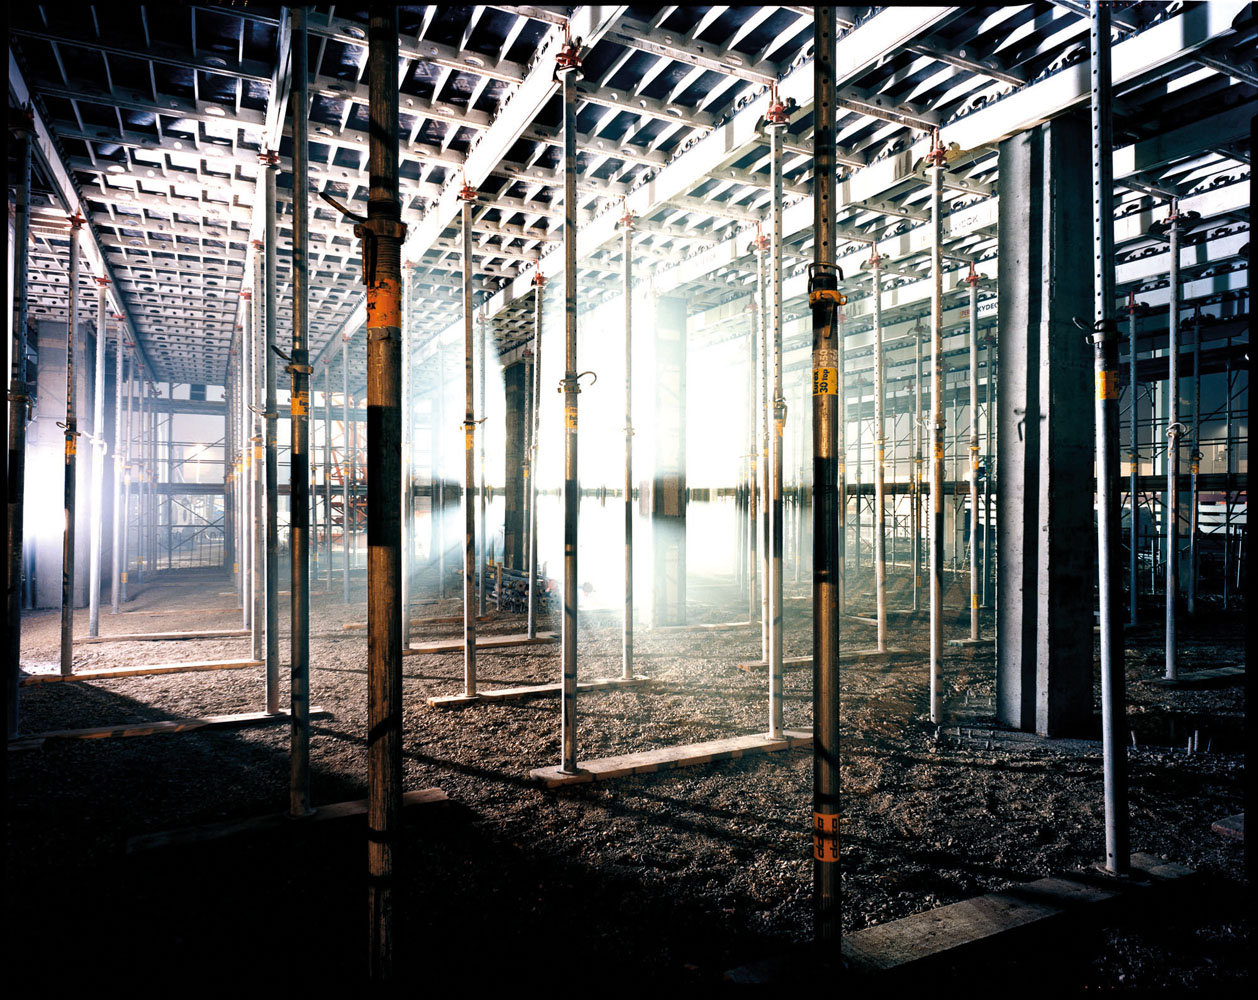 Photo of skeletal inside of cigarette factory during its construction with eerie shafts of light beaming through